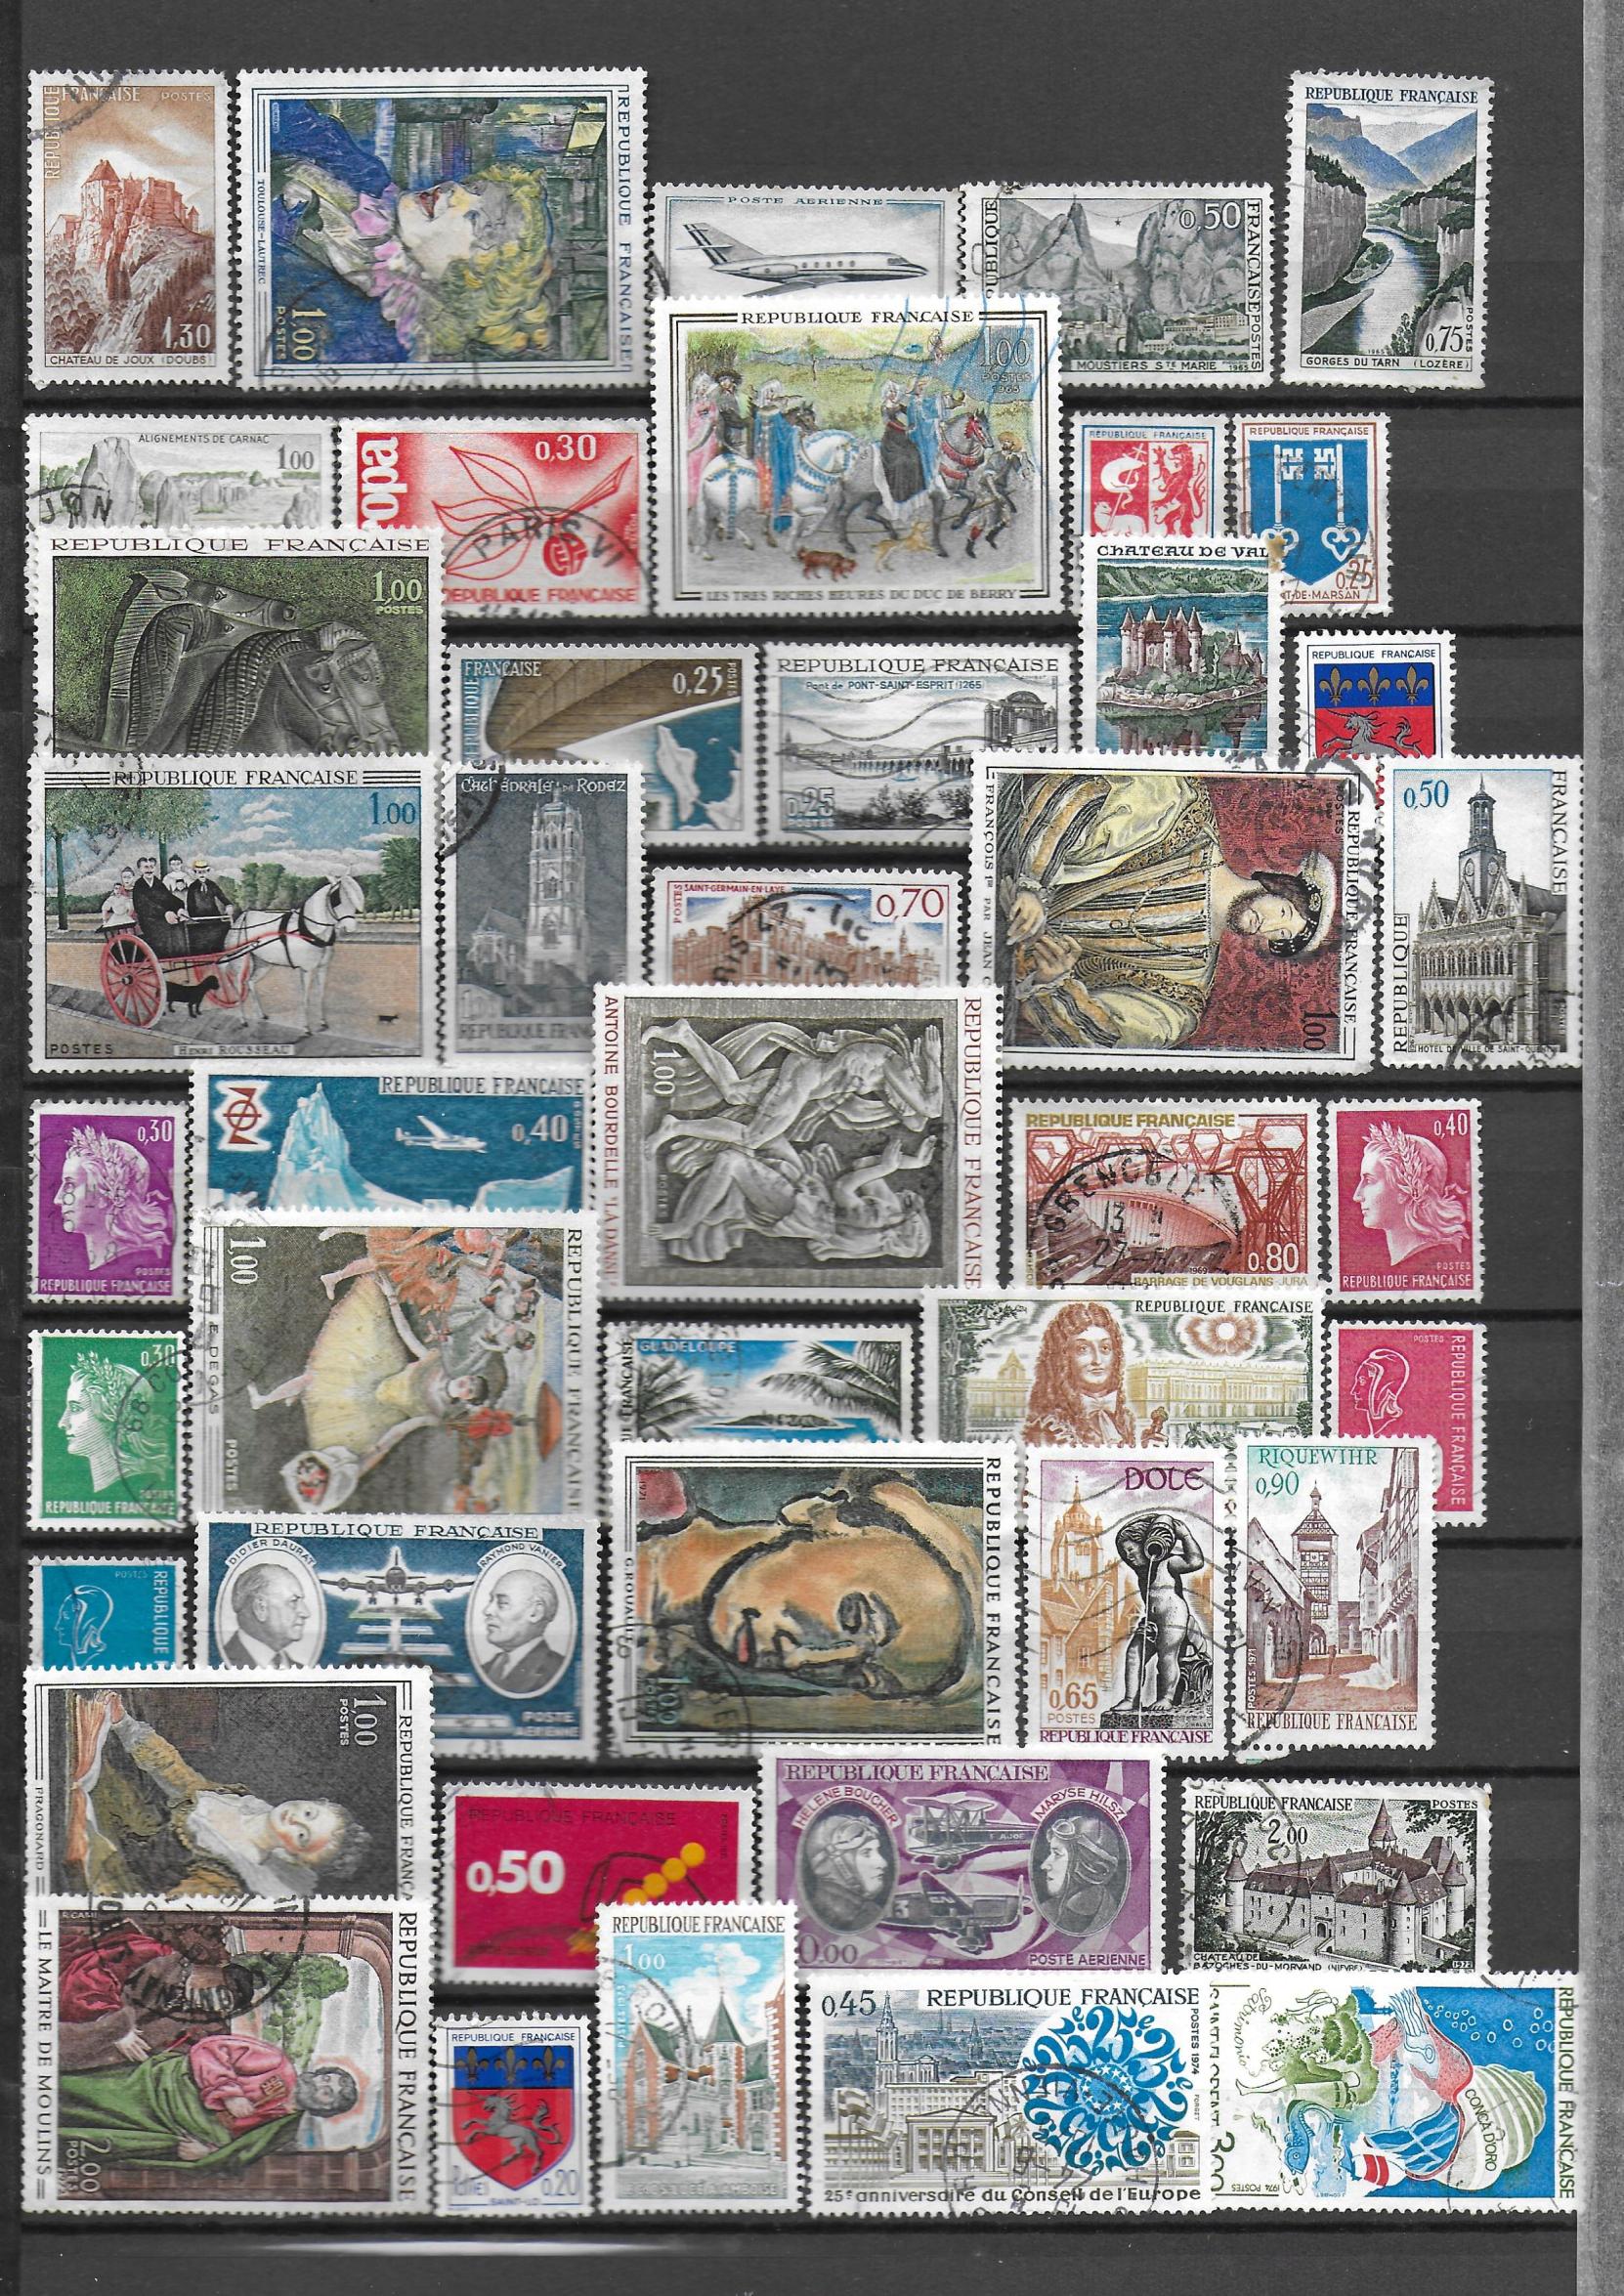 Timbres France 2 - Copie.jpg